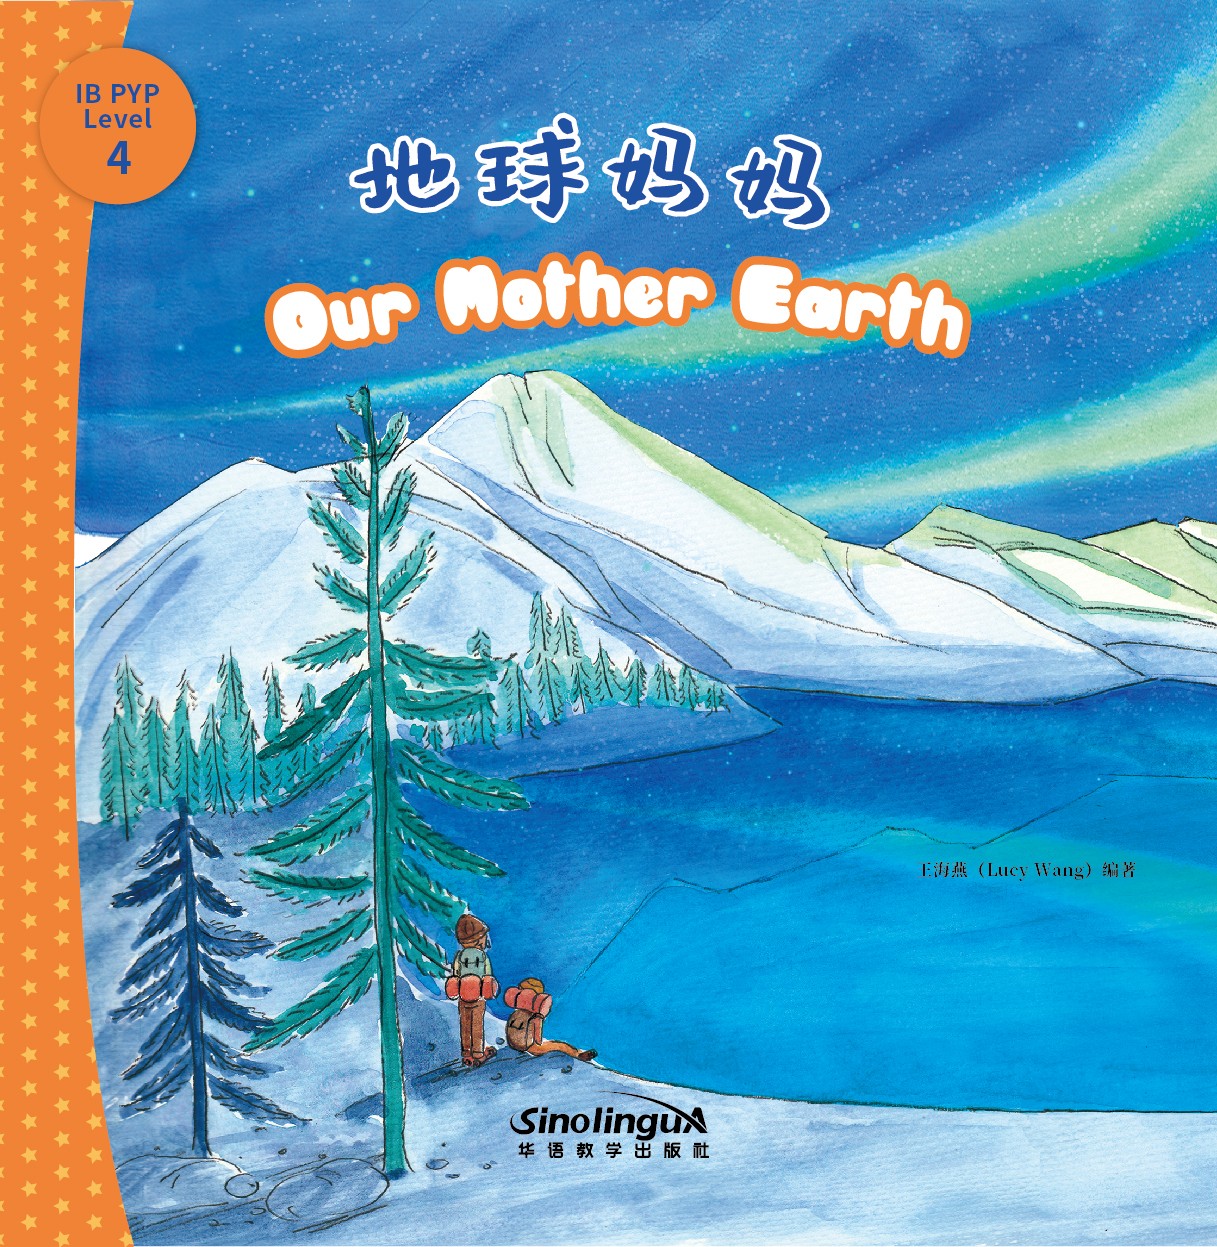 I Can Read by Myself IB-PYP Inquiry Graded Readers Level 4::Our Mother Earth